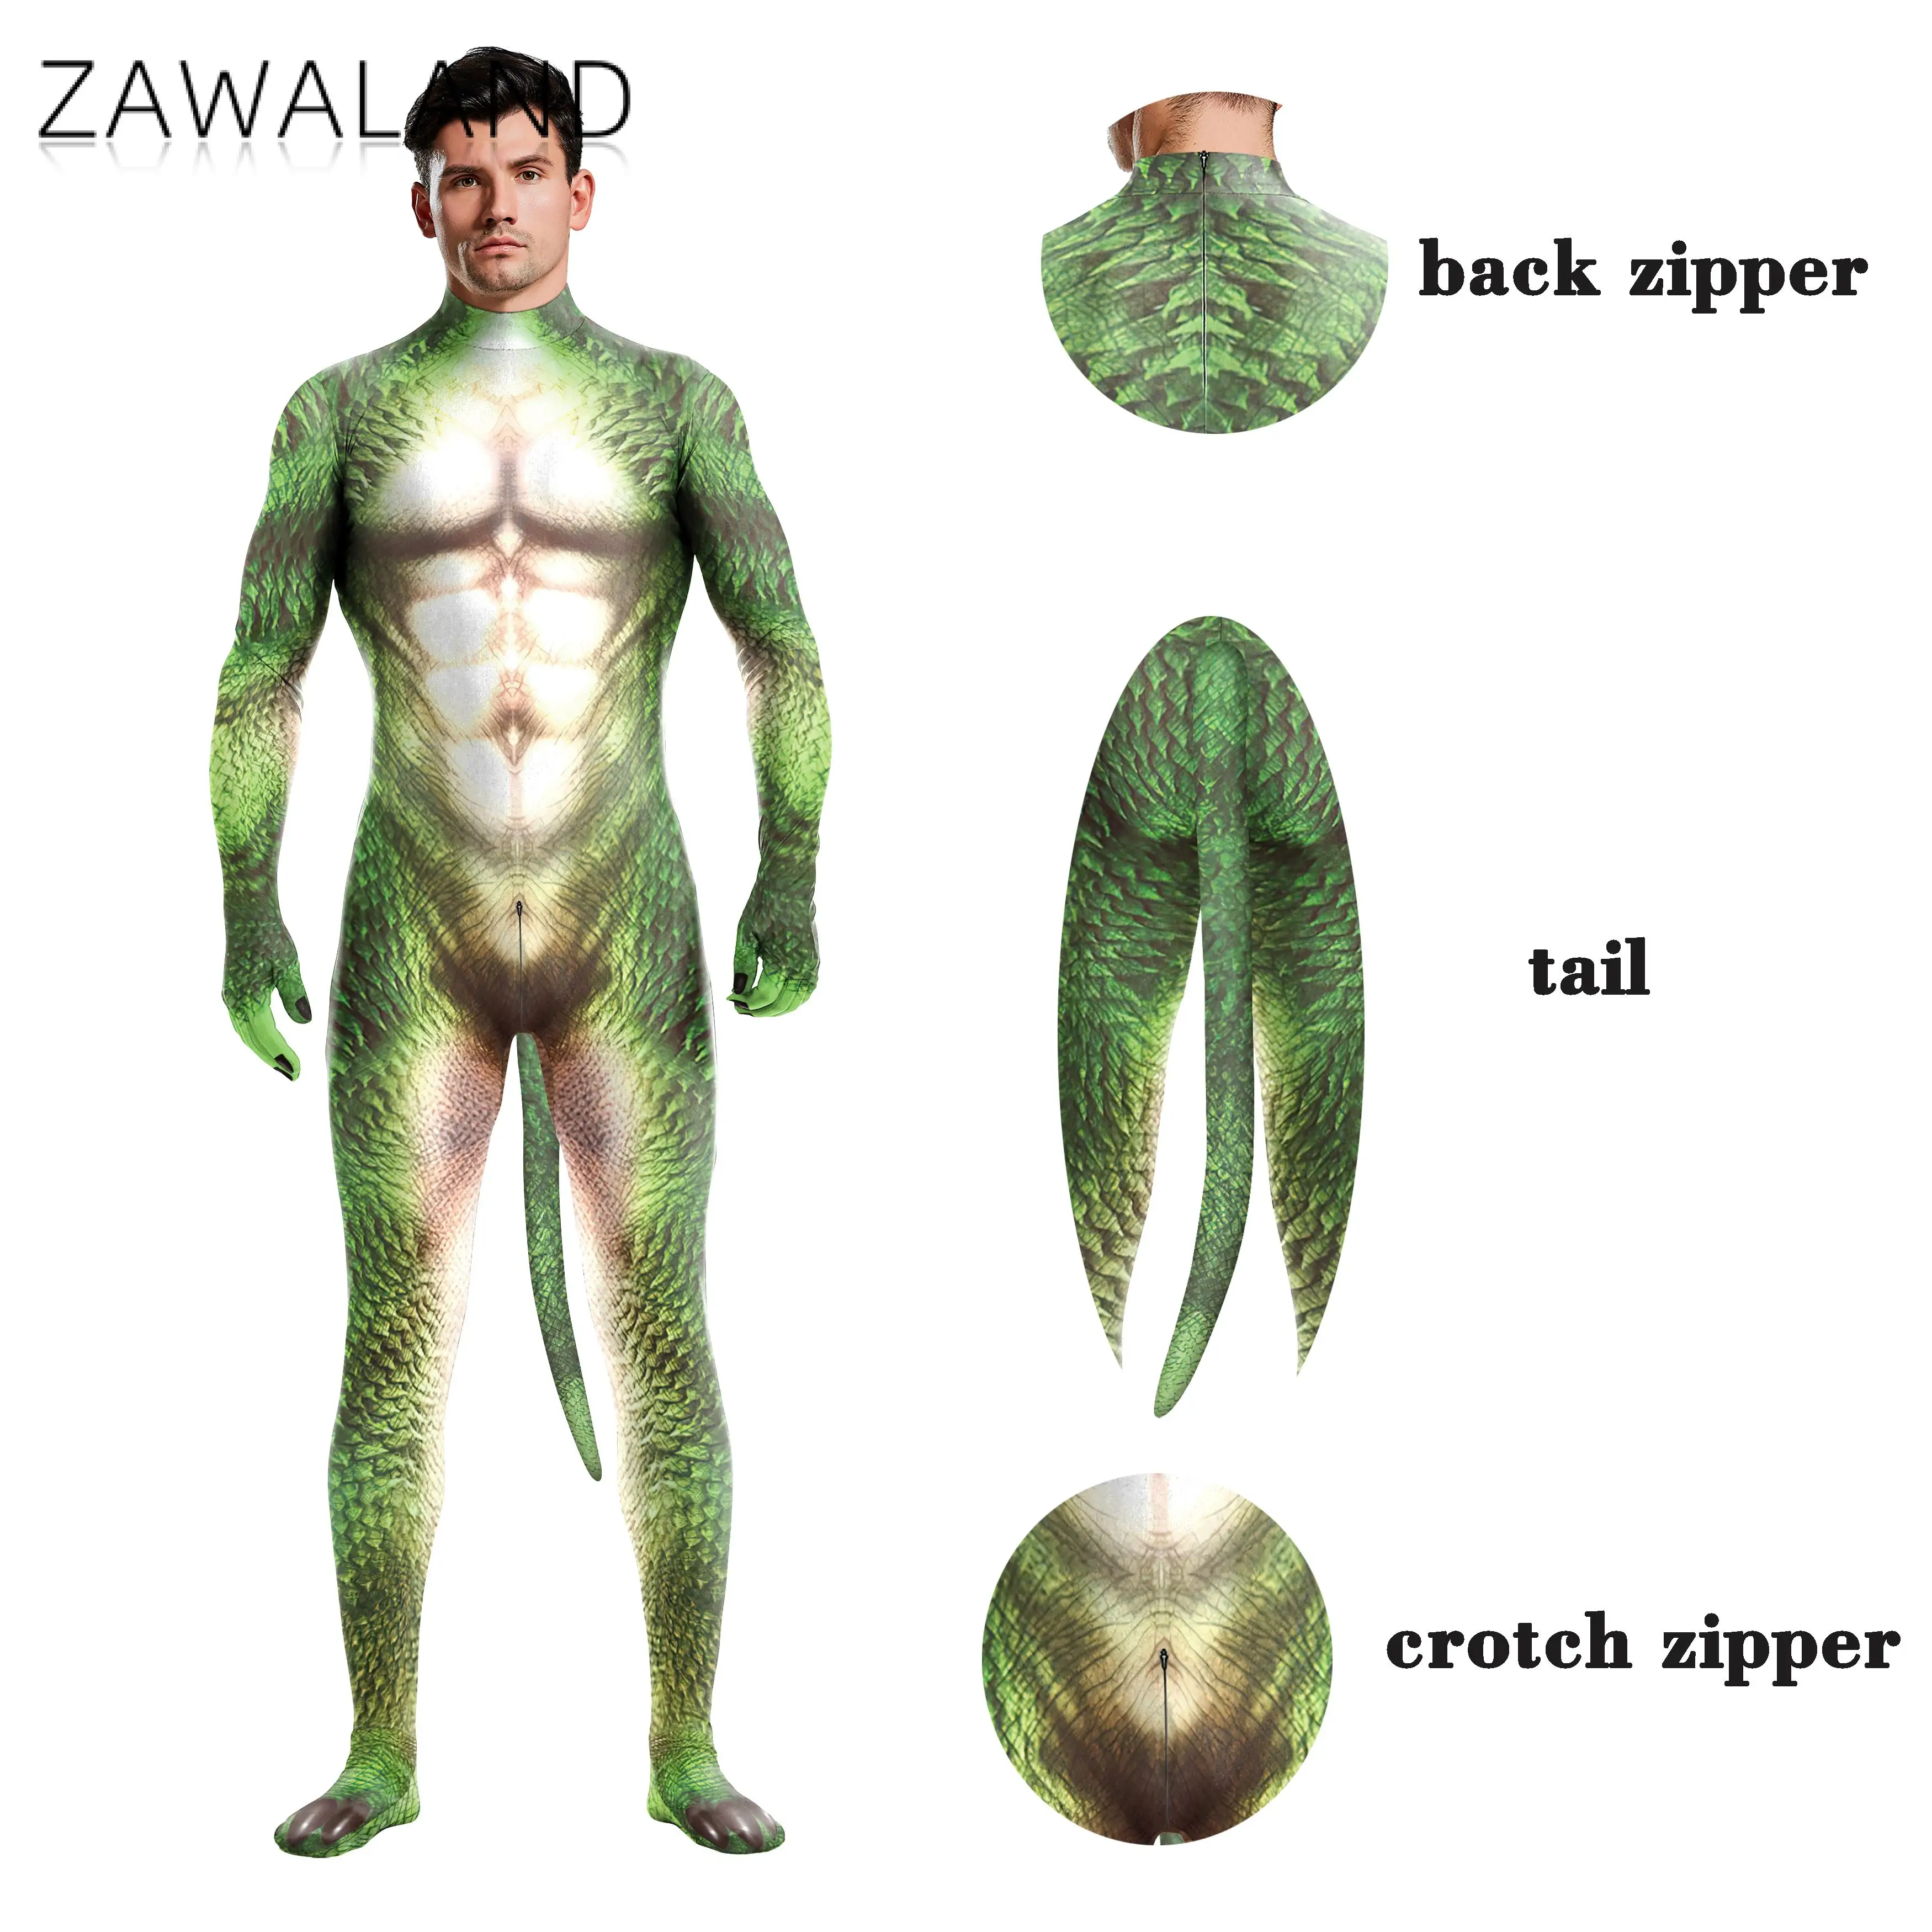 

Zawaland Men 3D Crocodile Texture Printed Animal Cosplay Costume Bodysuit with Tail Crotch Zipper Jumpsuits Catsuit Zentai Suits